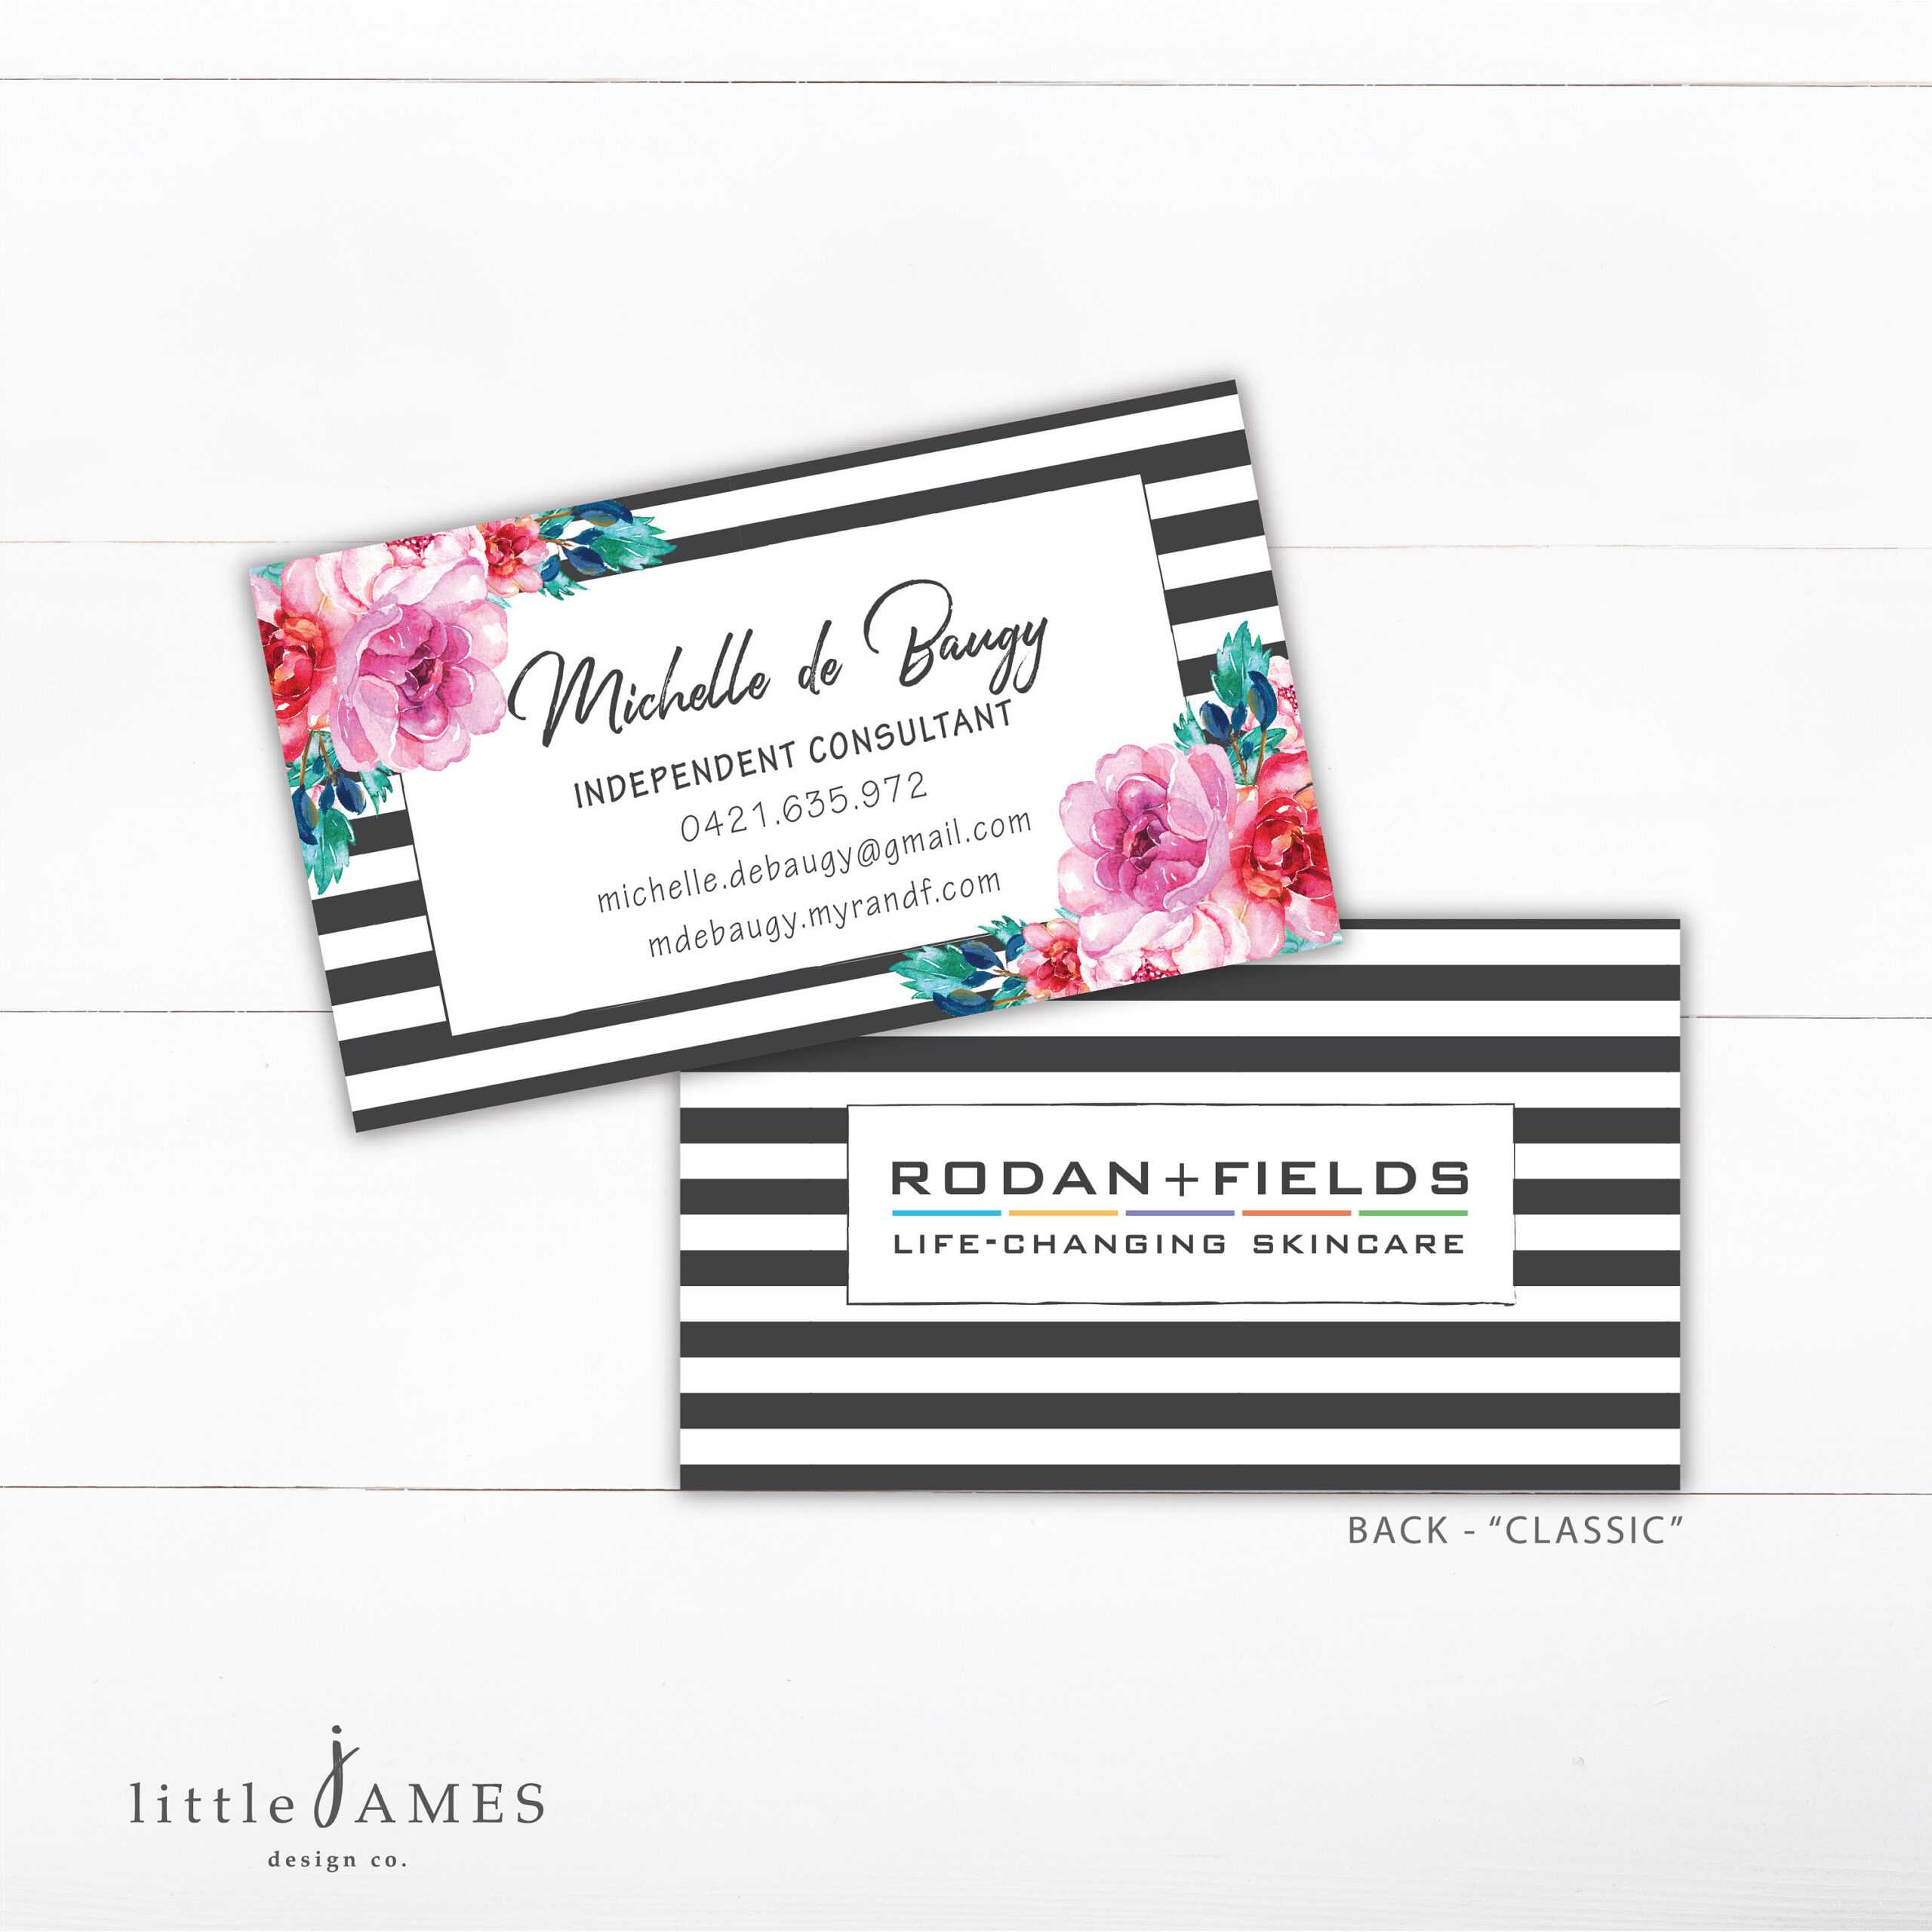 Rodan And Fields Business Card – Business Card / Preferred Customer  Referral Card / Pc Perks Card Inside Rodan And Fields Business Card Template